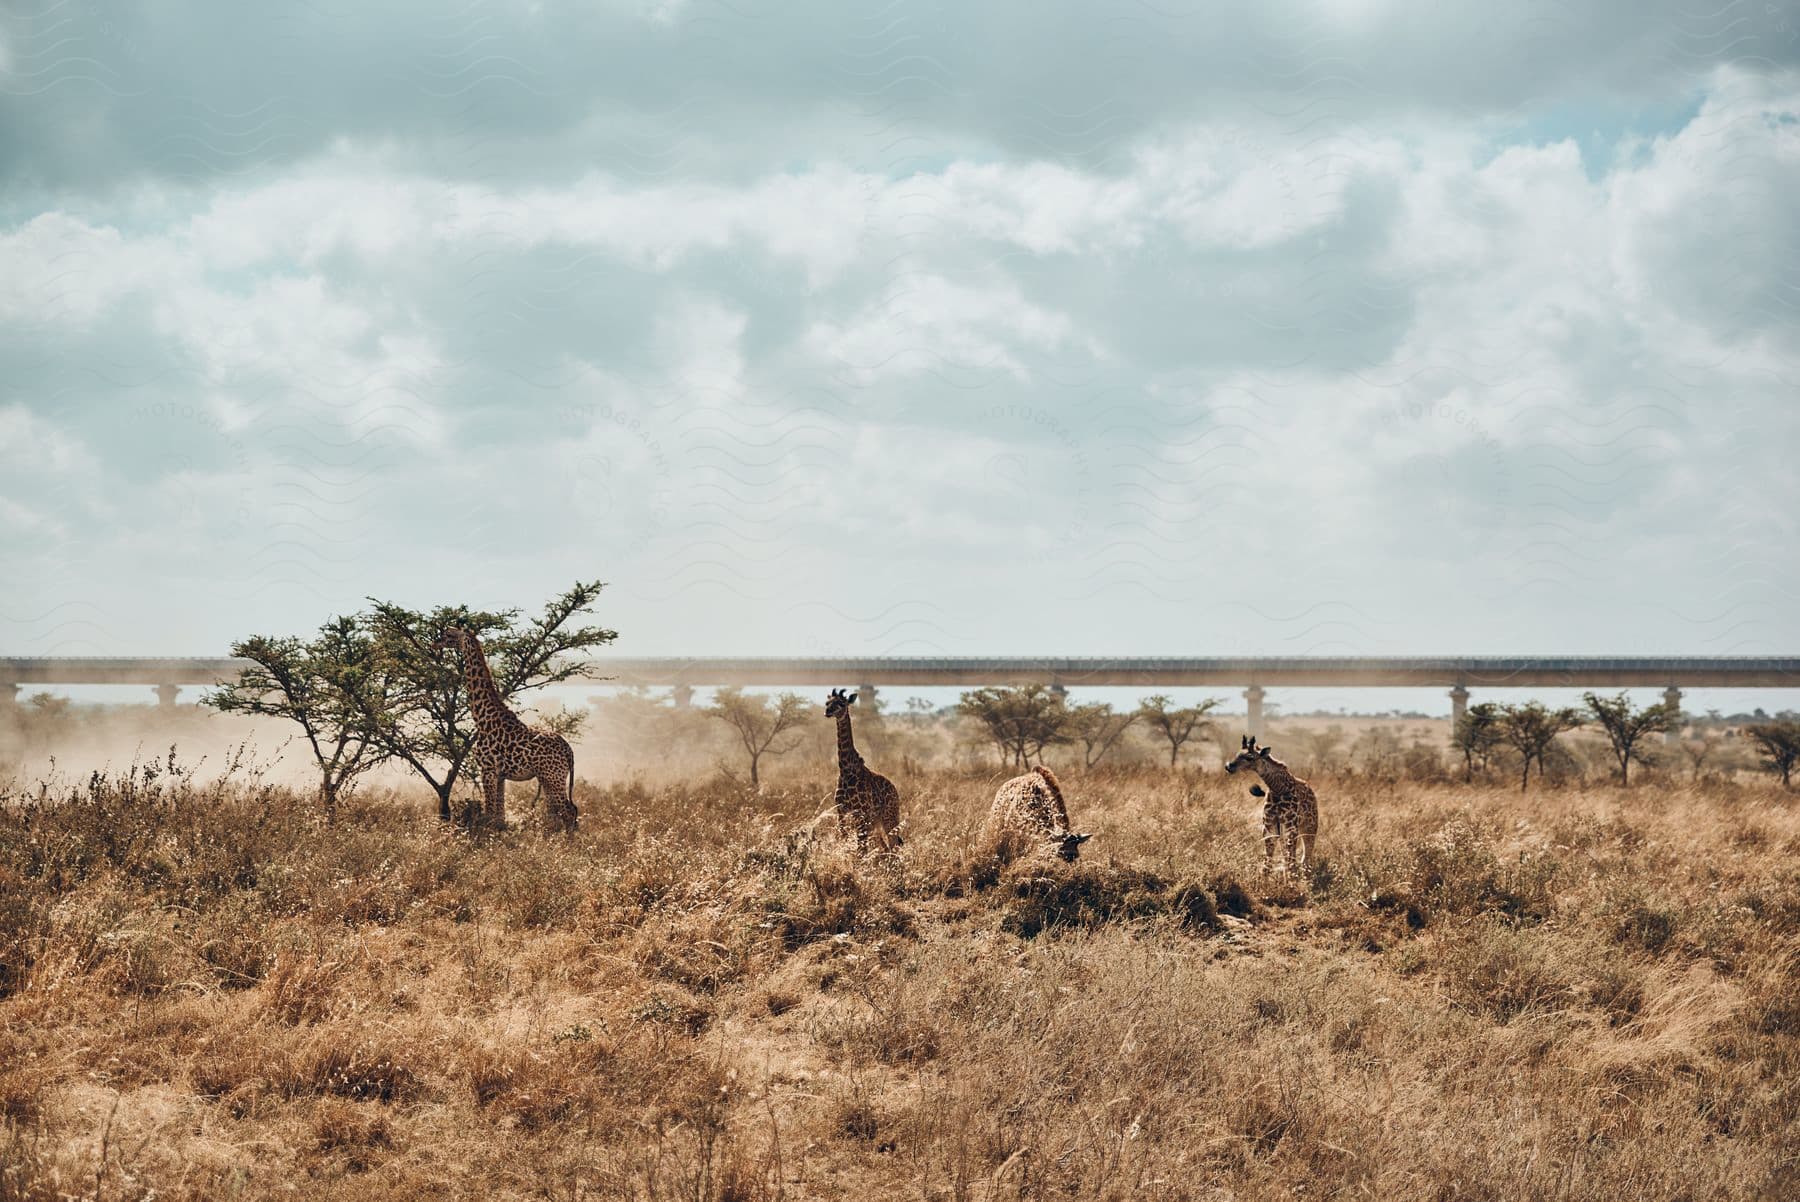 Giraffes on an african plain with an elevated highway in the background